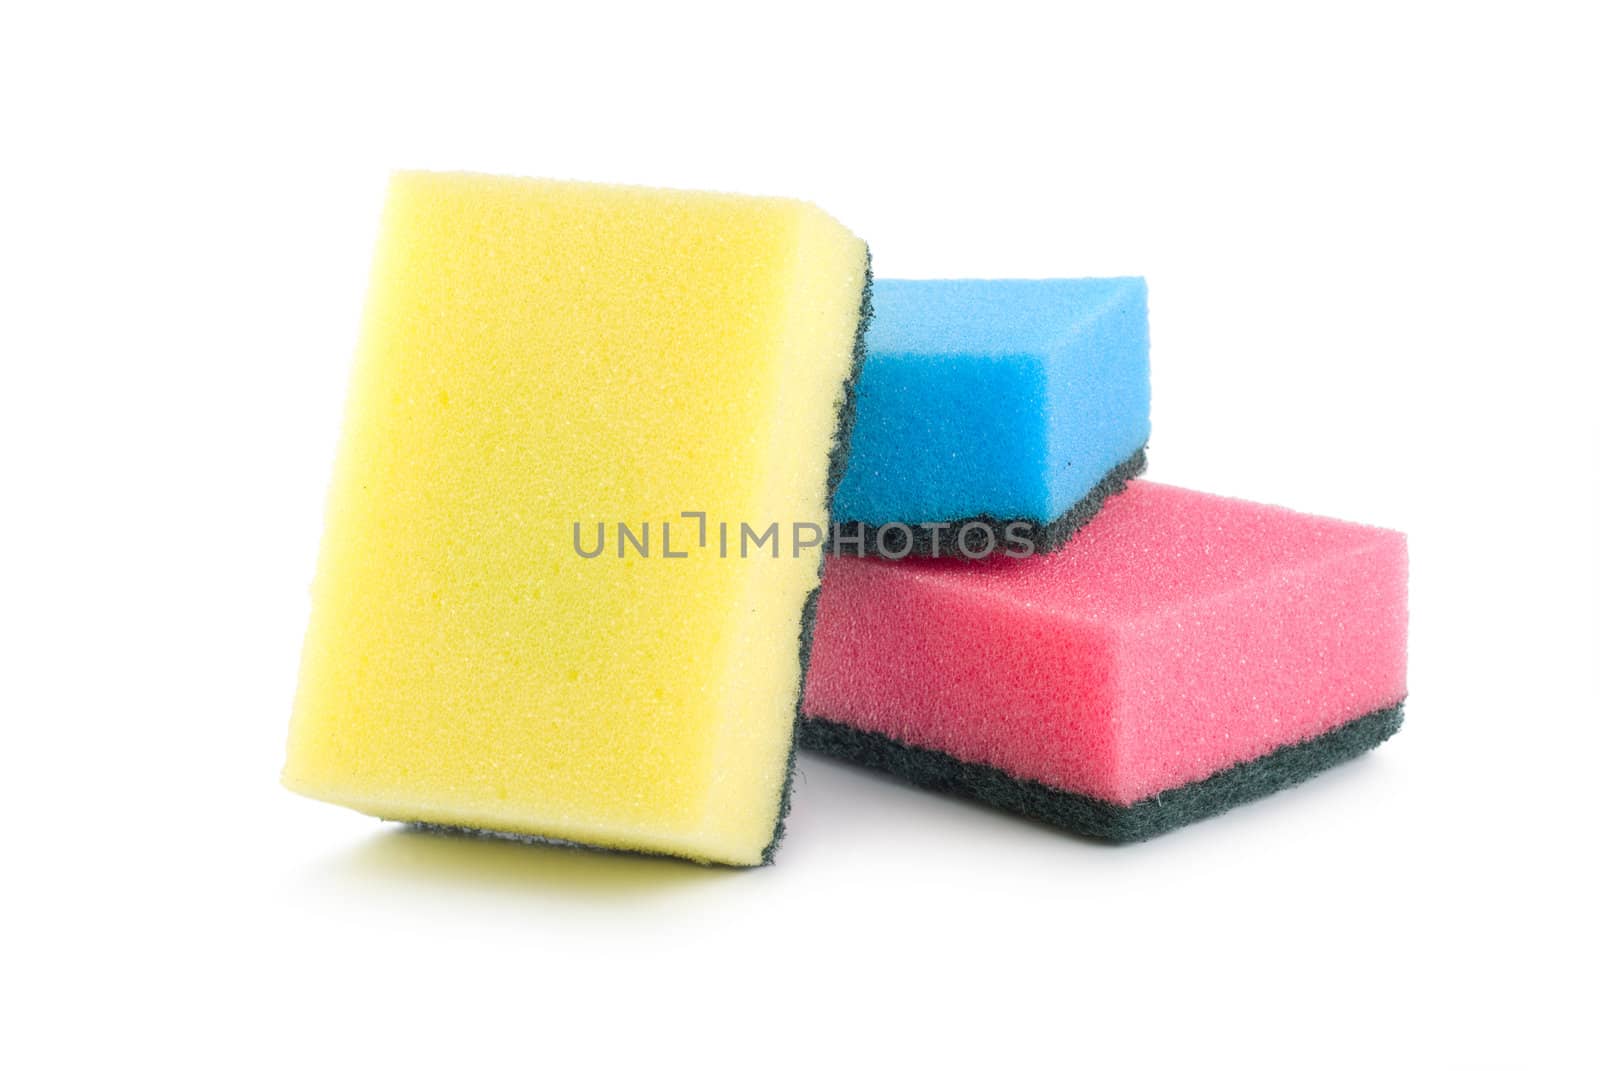 Three colored sponges isolated on white background